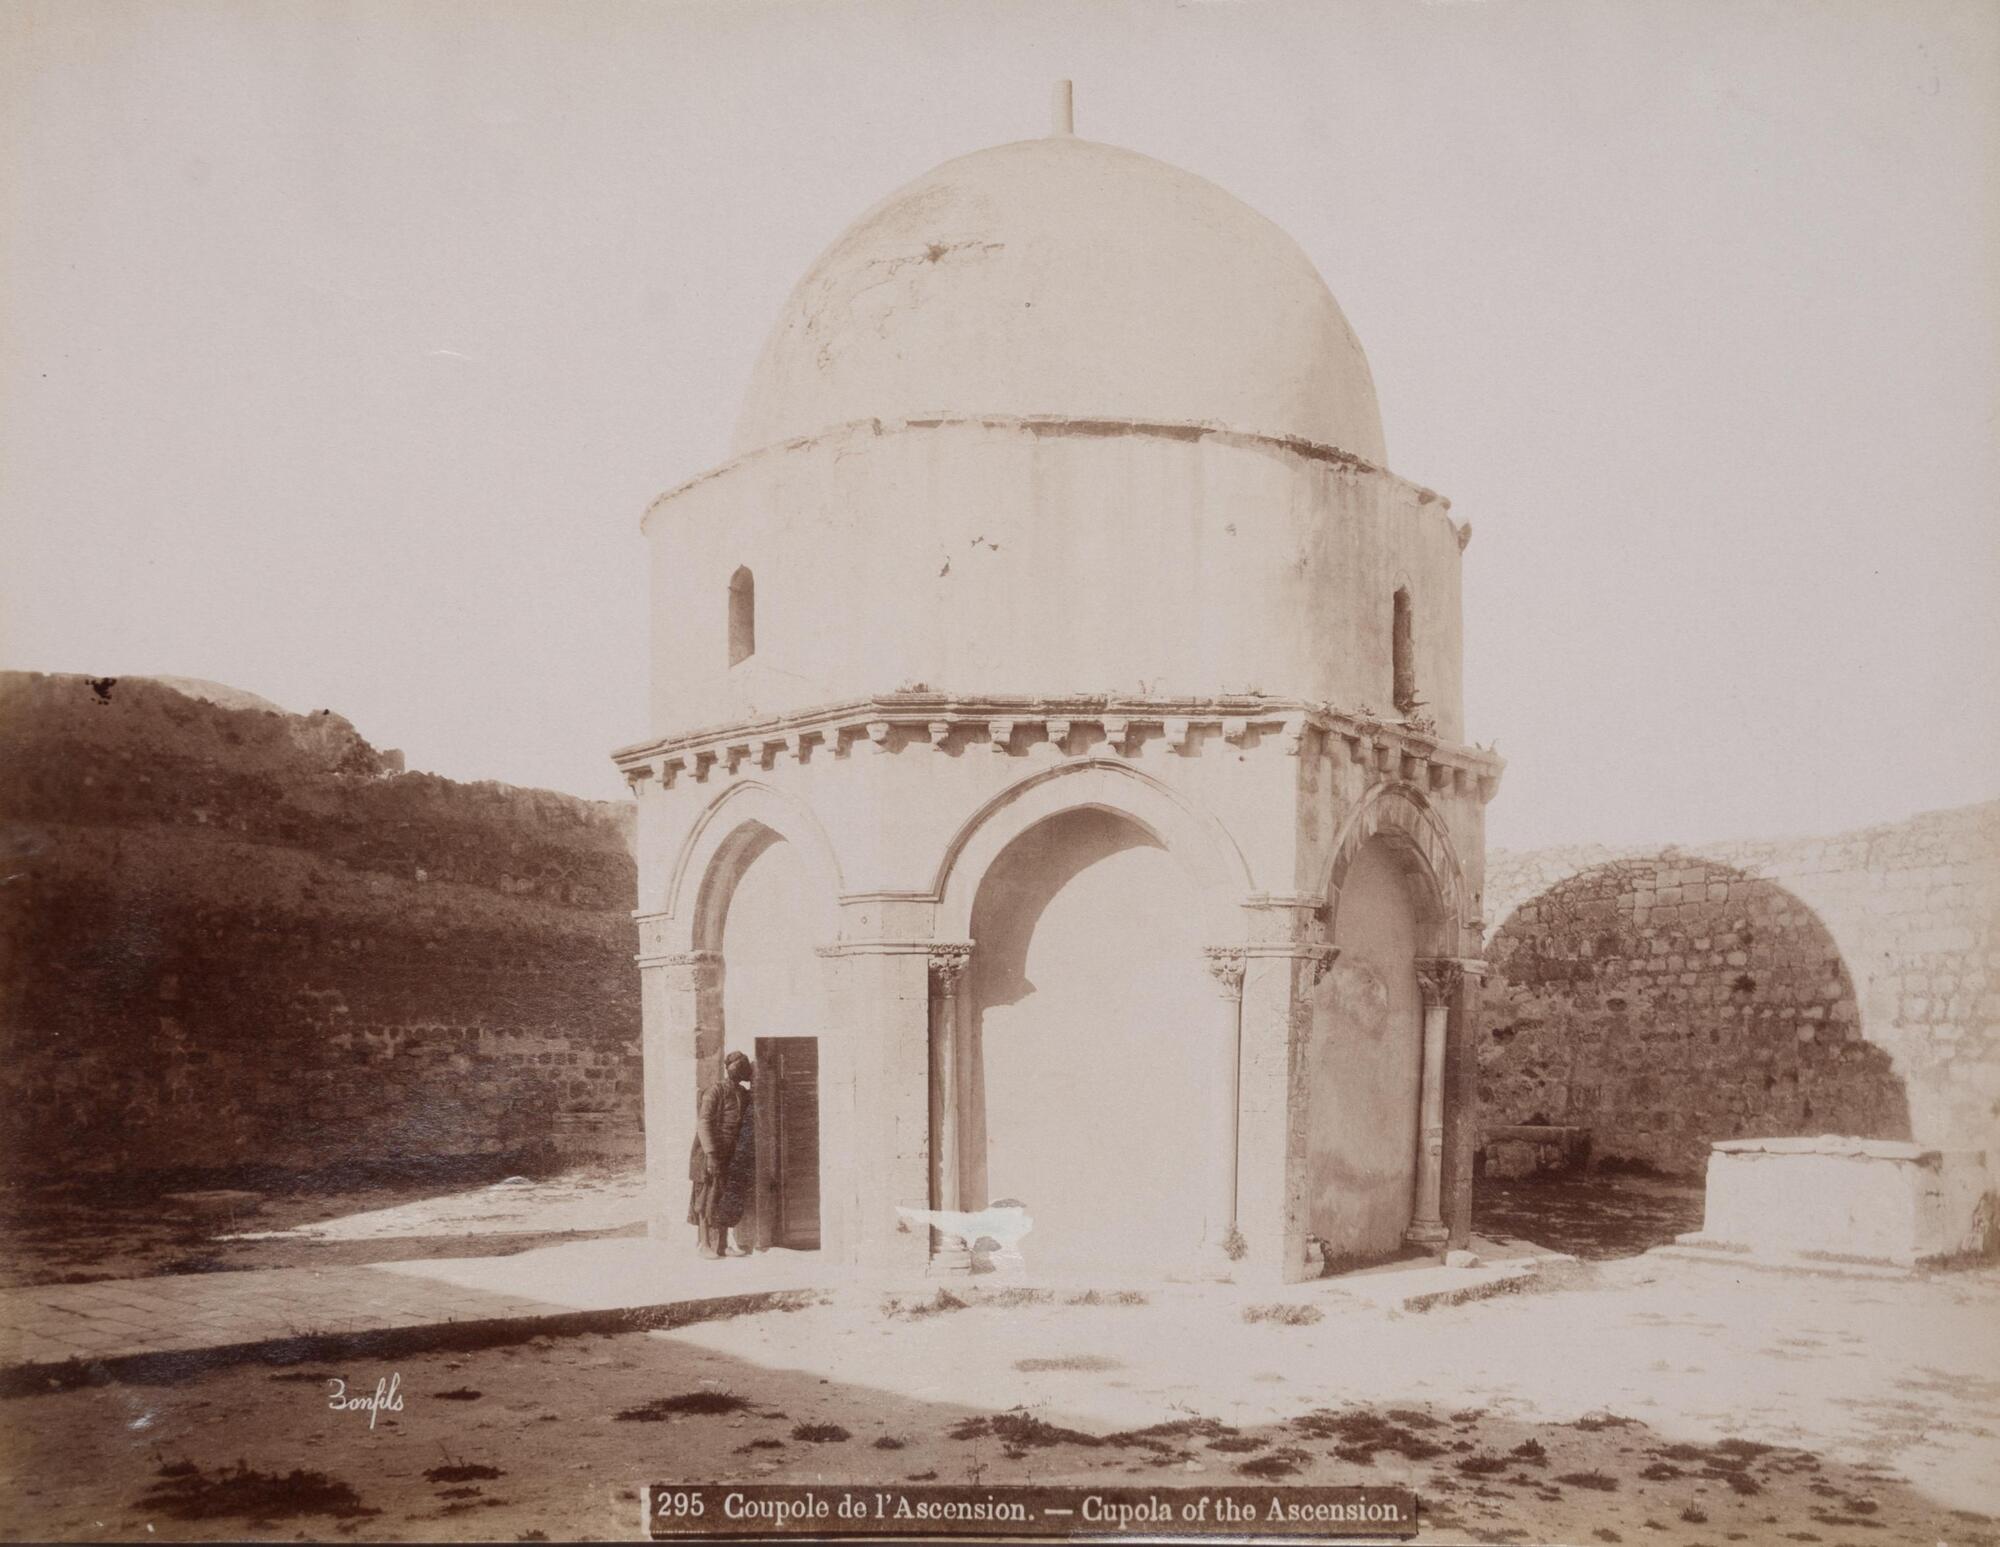 This photograph depicts a prominently placed domed structure in the center of a courtyard with a man standing at the threshhold of the door. 